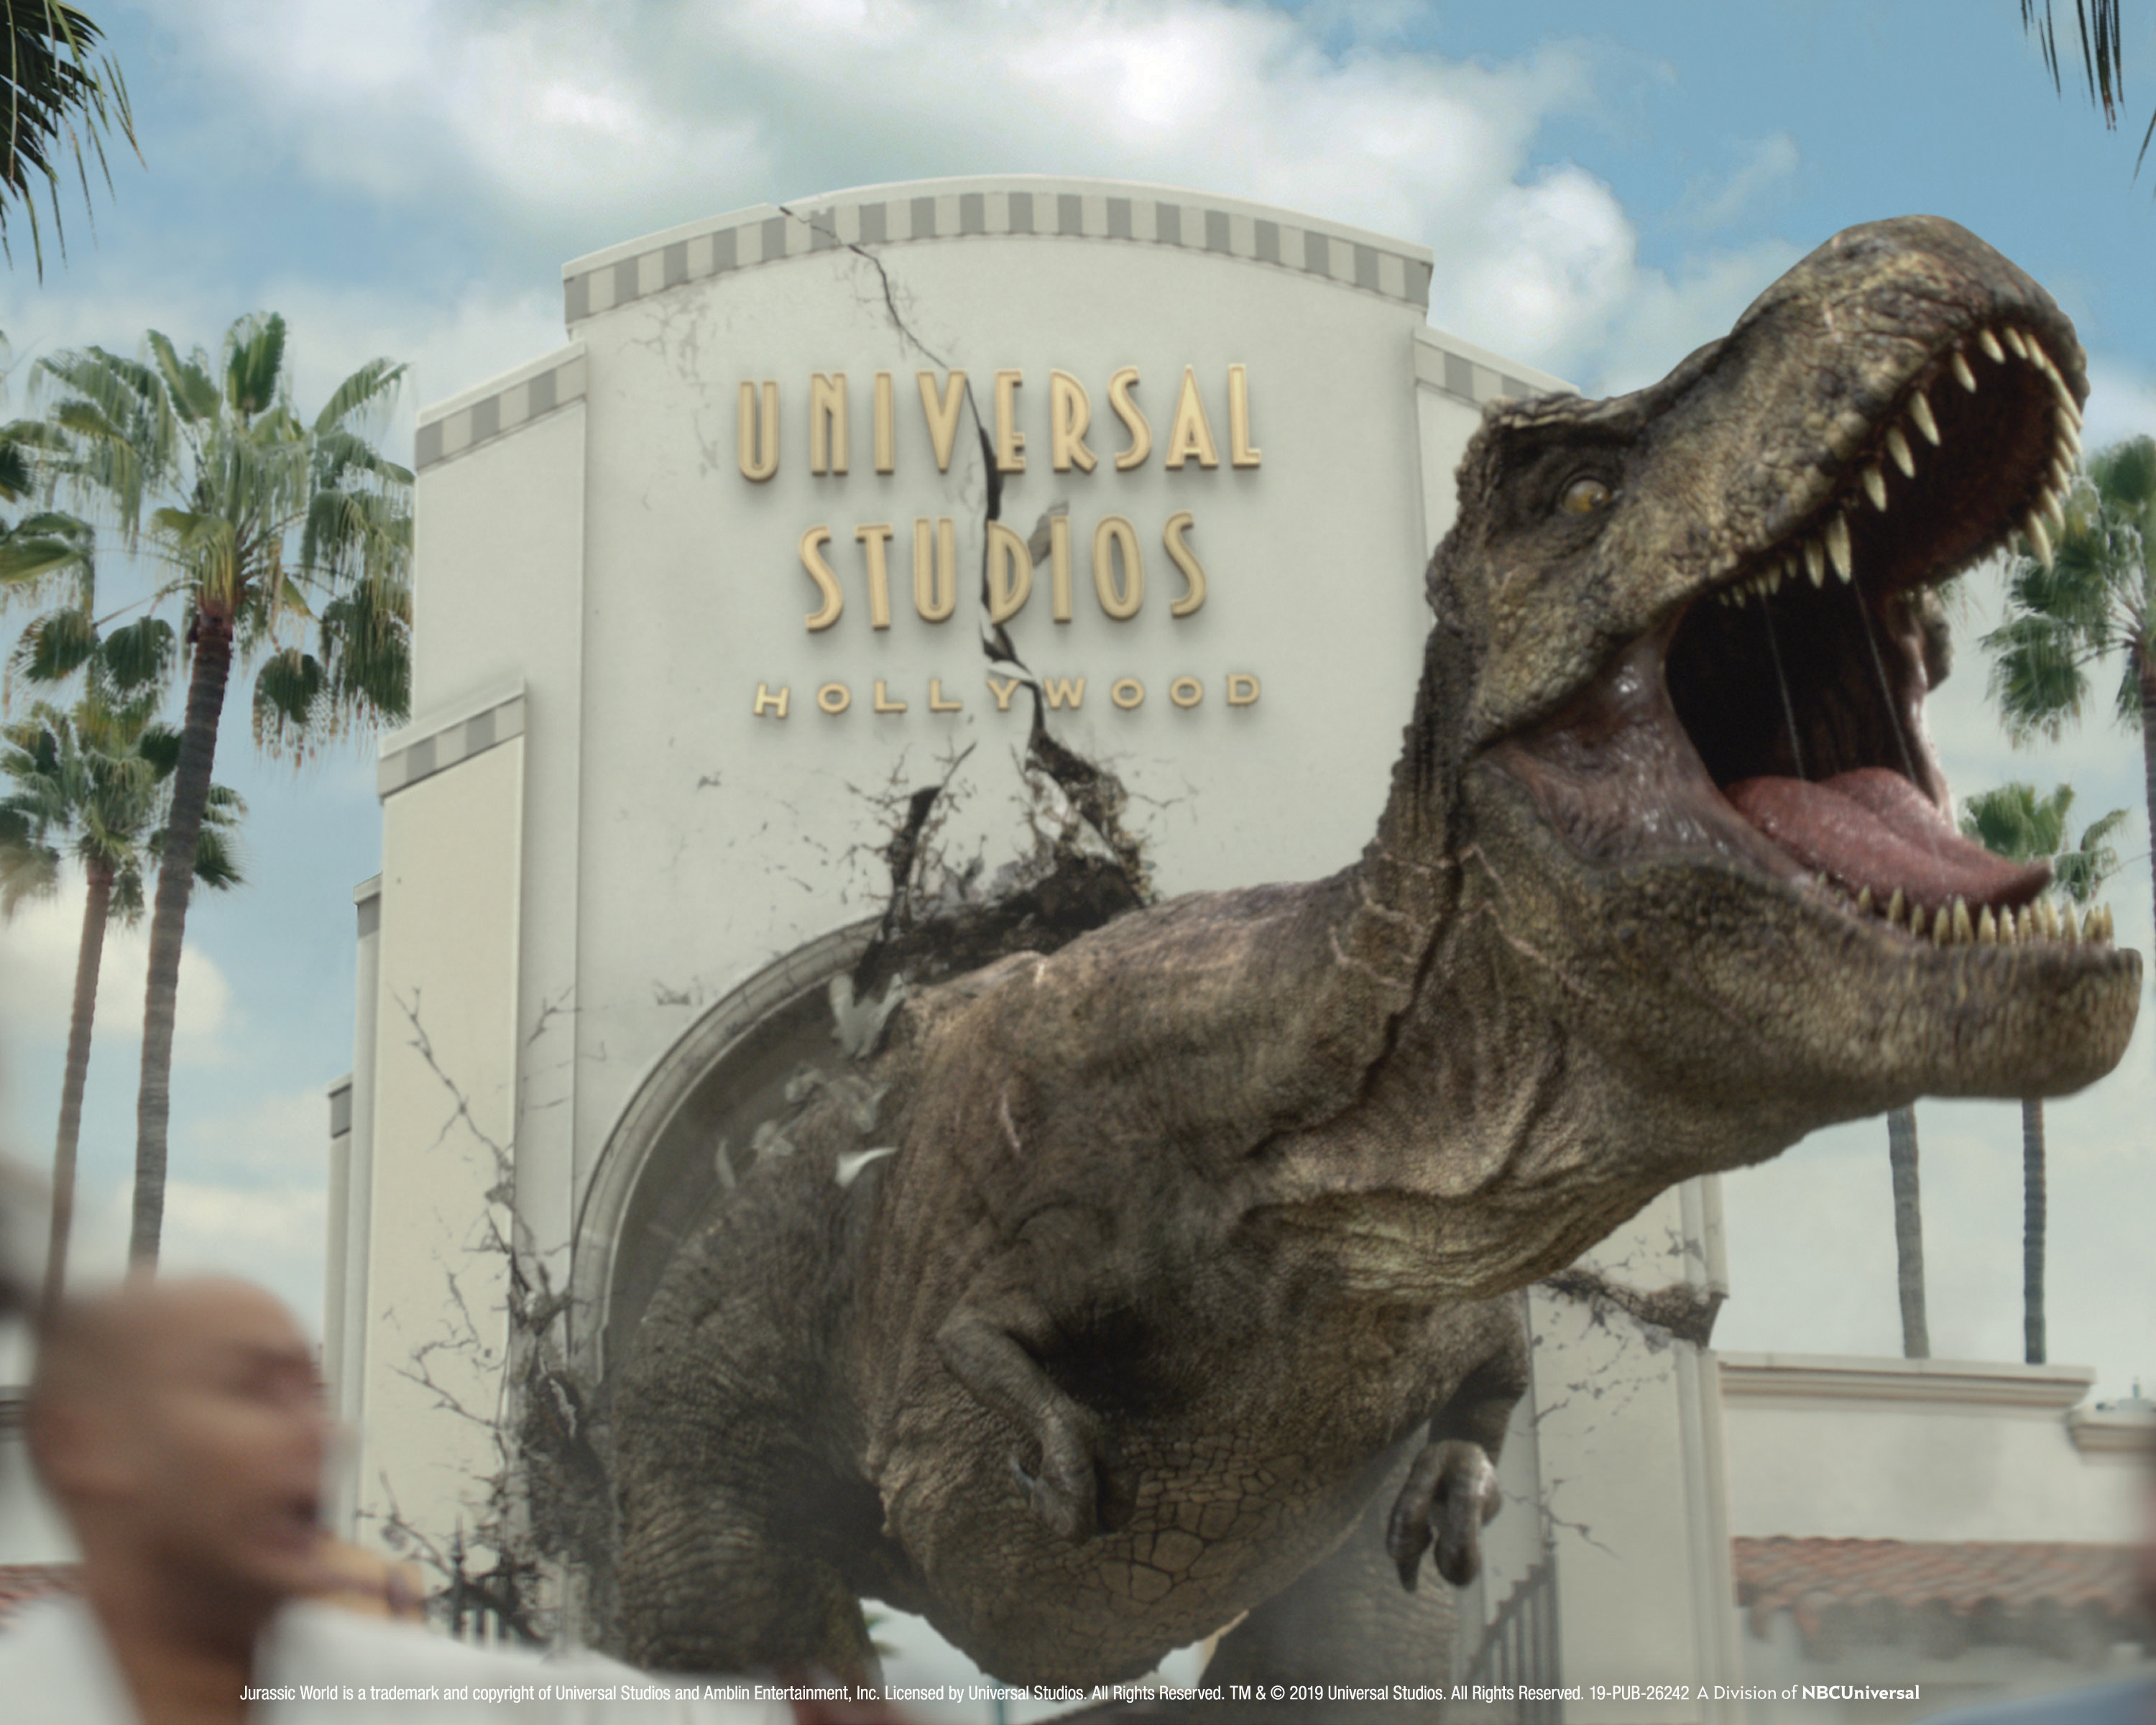 "It Just Got Real" As JURASSIC WORLD’s Iconic Tyrannosaurus Rex And